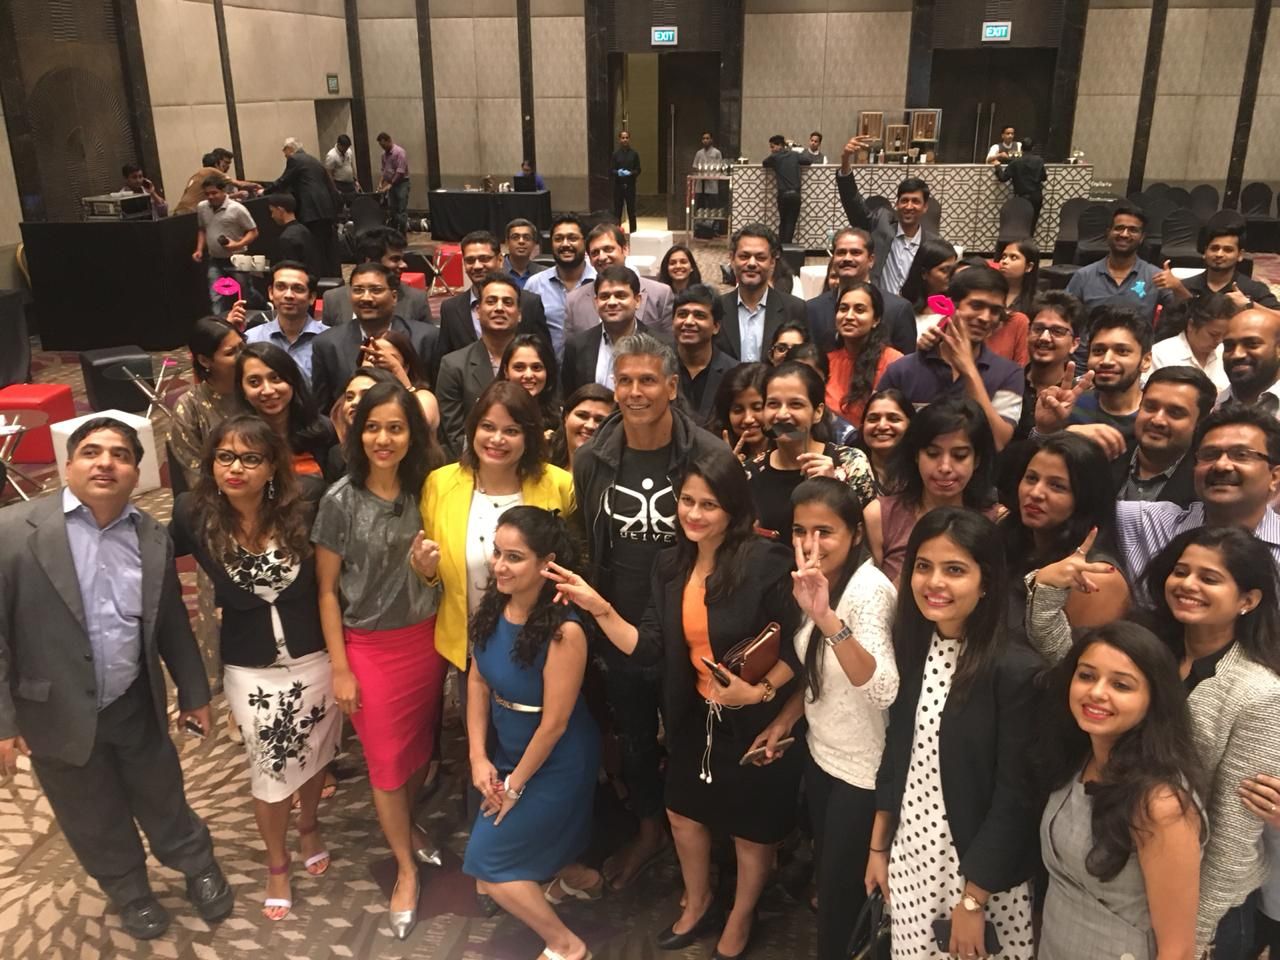 #BusinessBeyondBias: SAP India brings together industry leaders, social activists and celebrities to initiate dialogue on diversity and inclusion